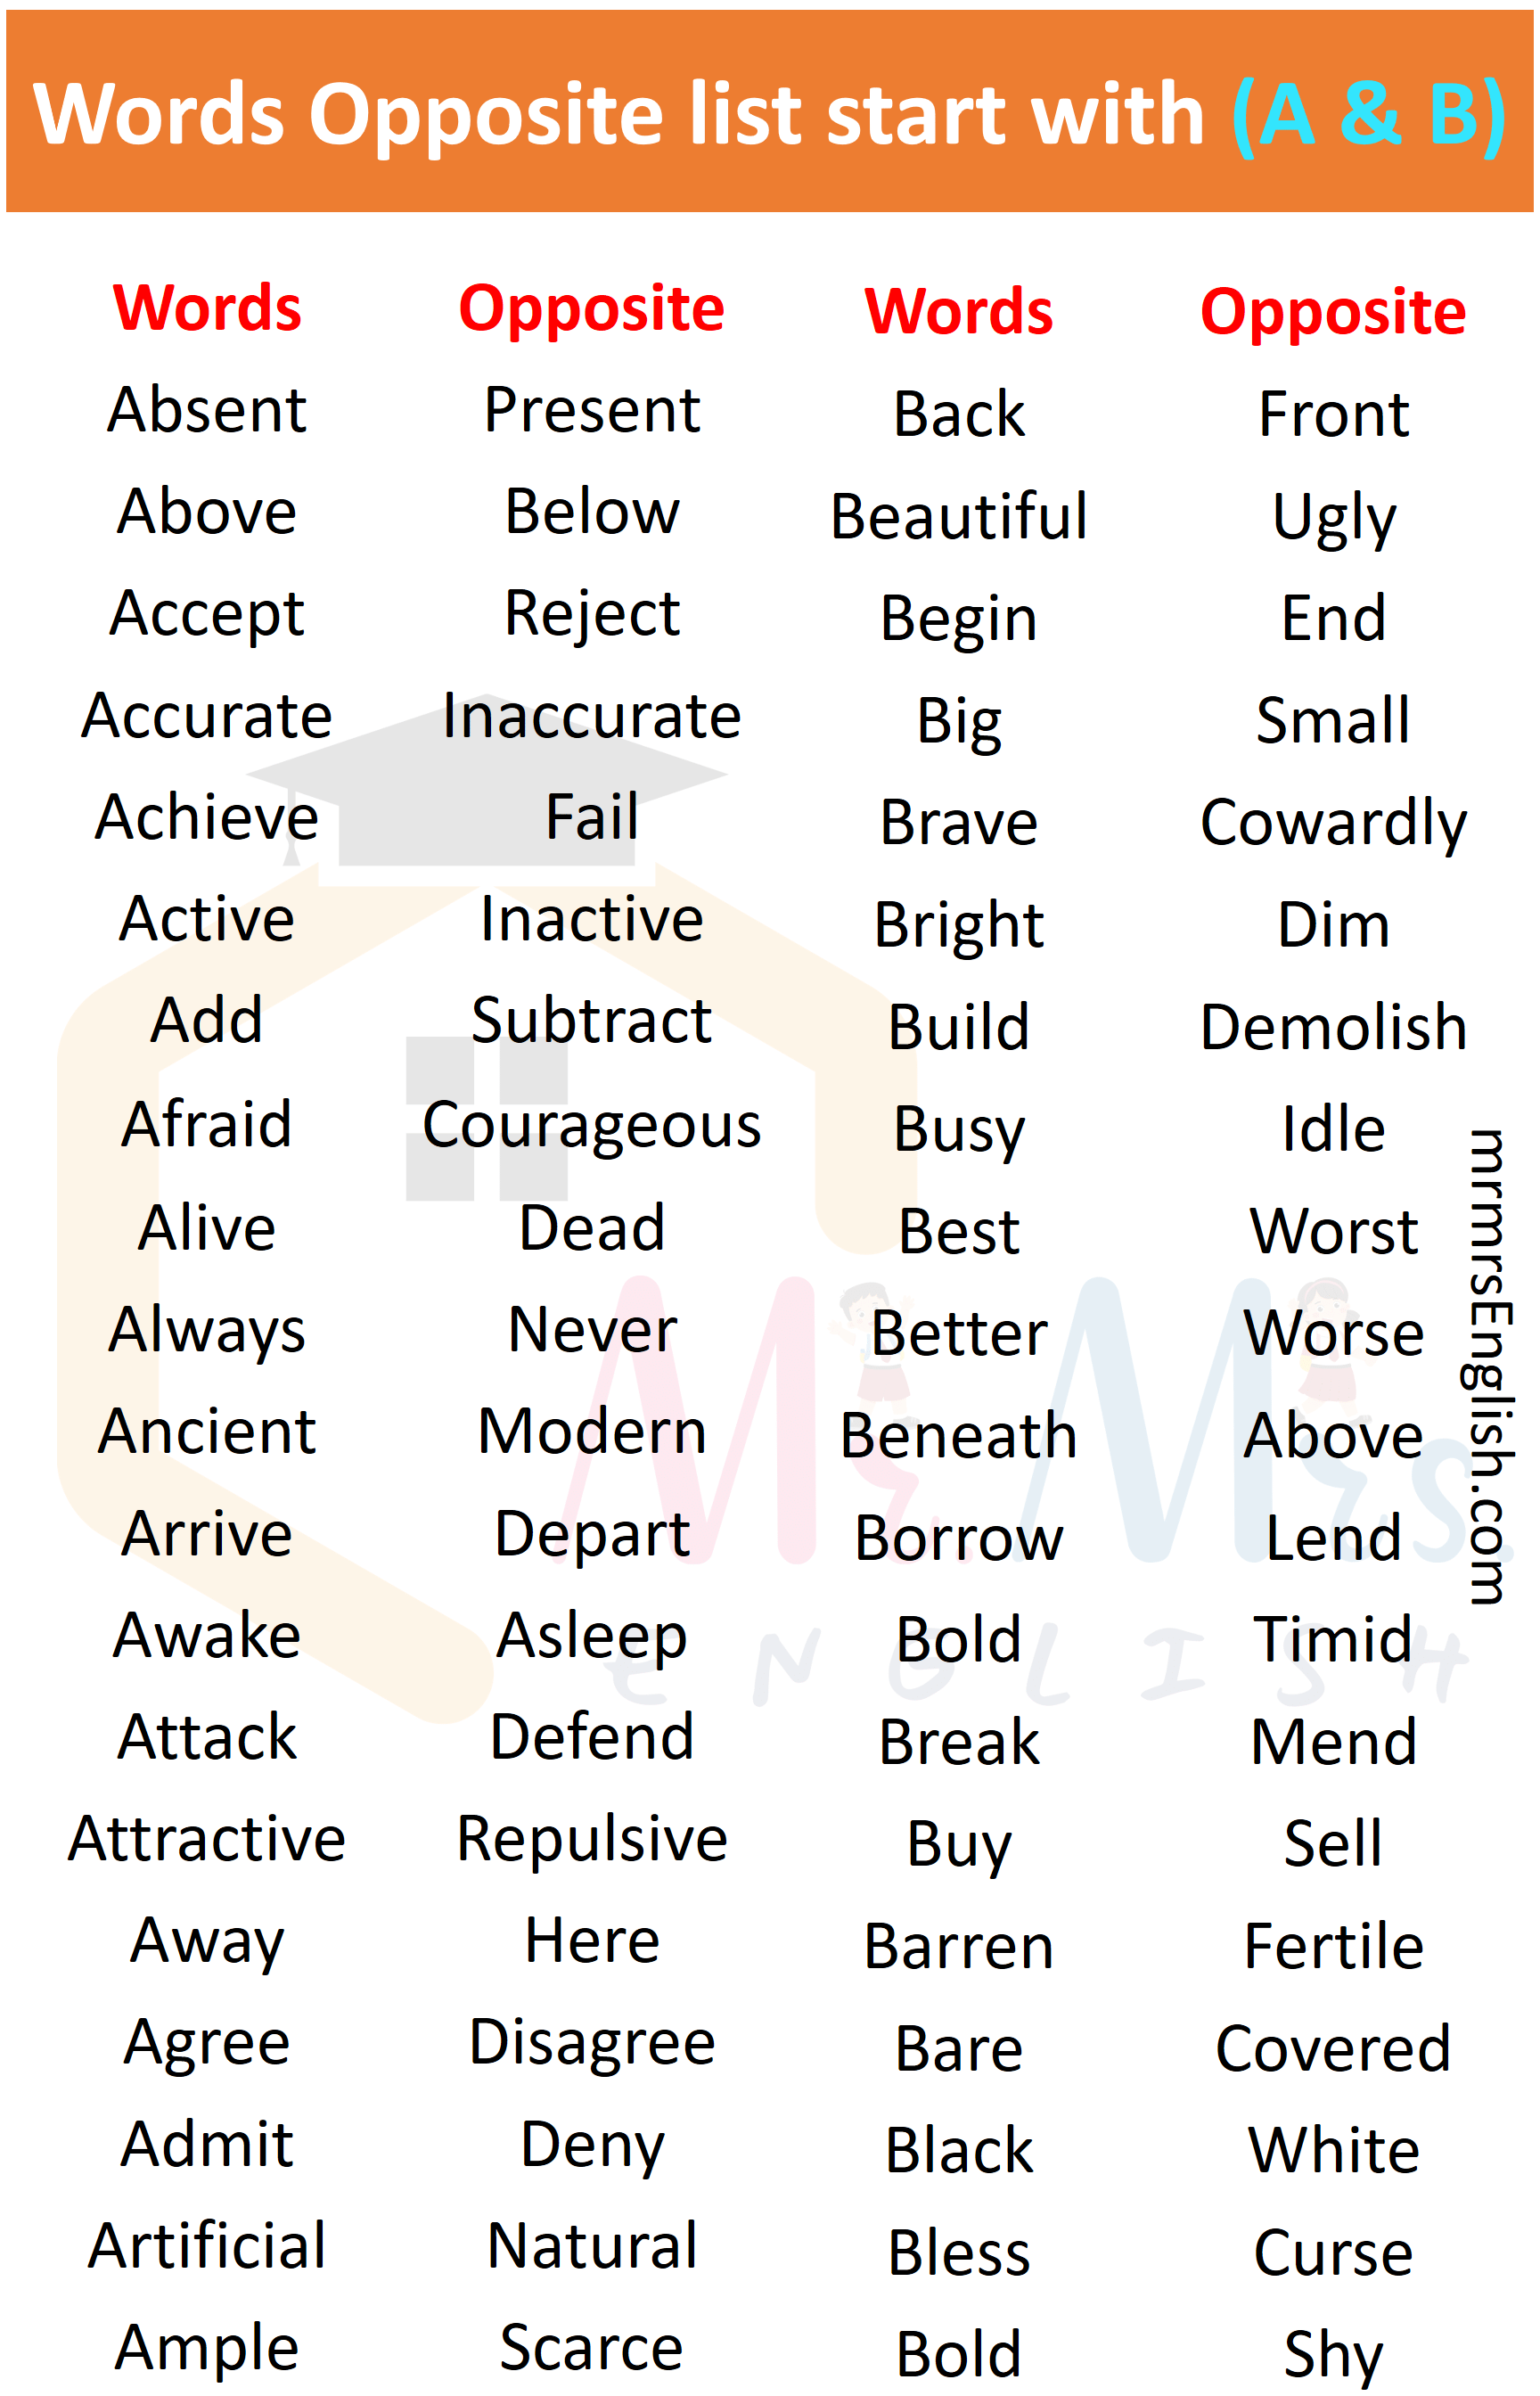 Words Opposite List | Words Opposite list A and B